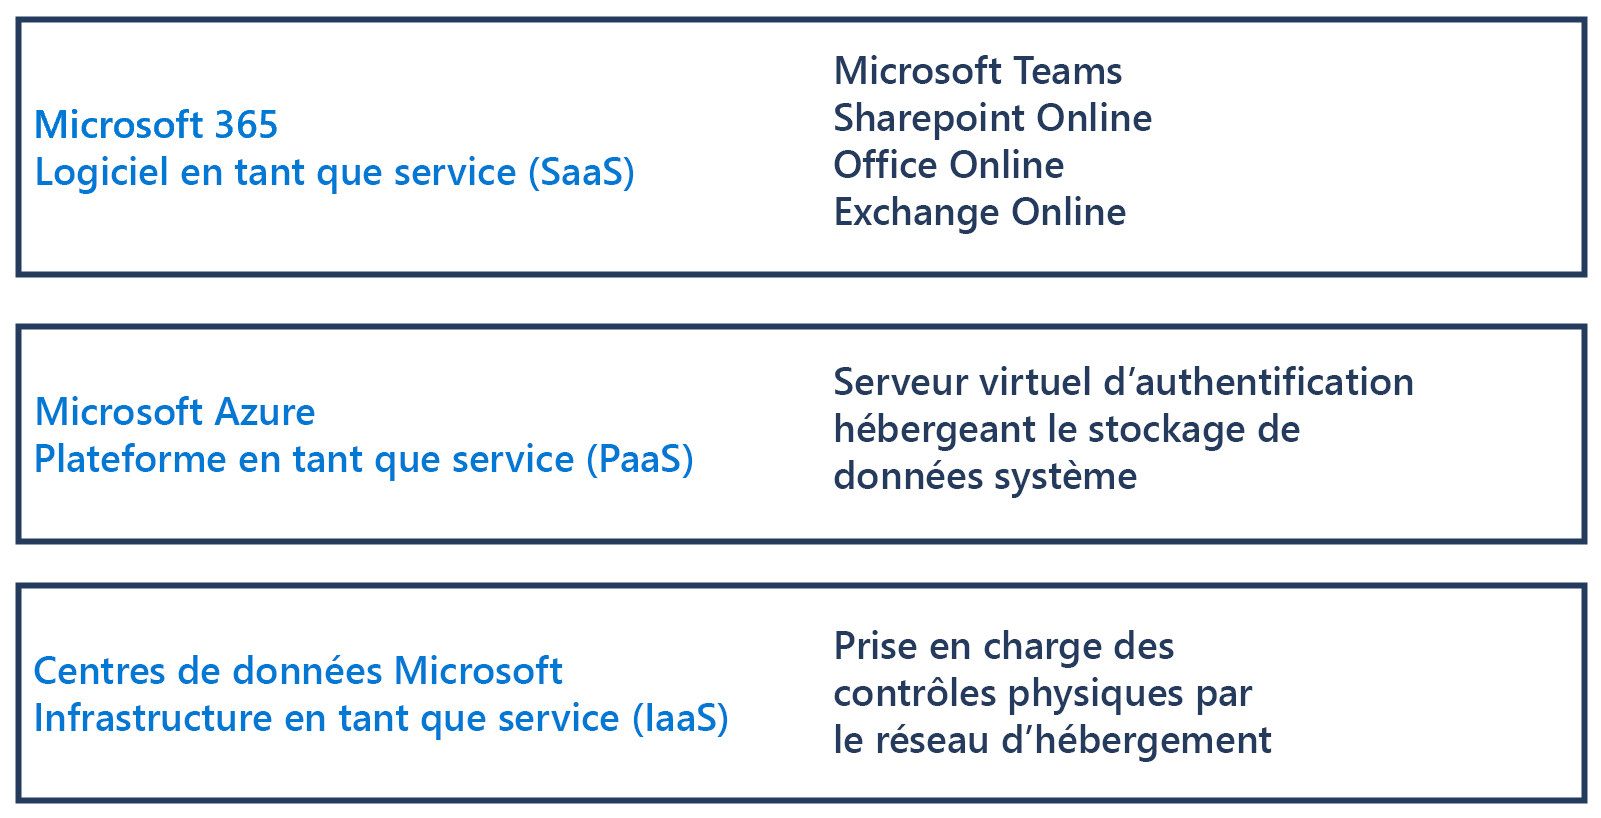 Diagramme montrant les distinctions entre Microsoft 3 65 Software as a service (SaaS), Microsoft Azure Platform as a service (PaaS) et Microsoft datacenters infrastructure as a service (IaaS).